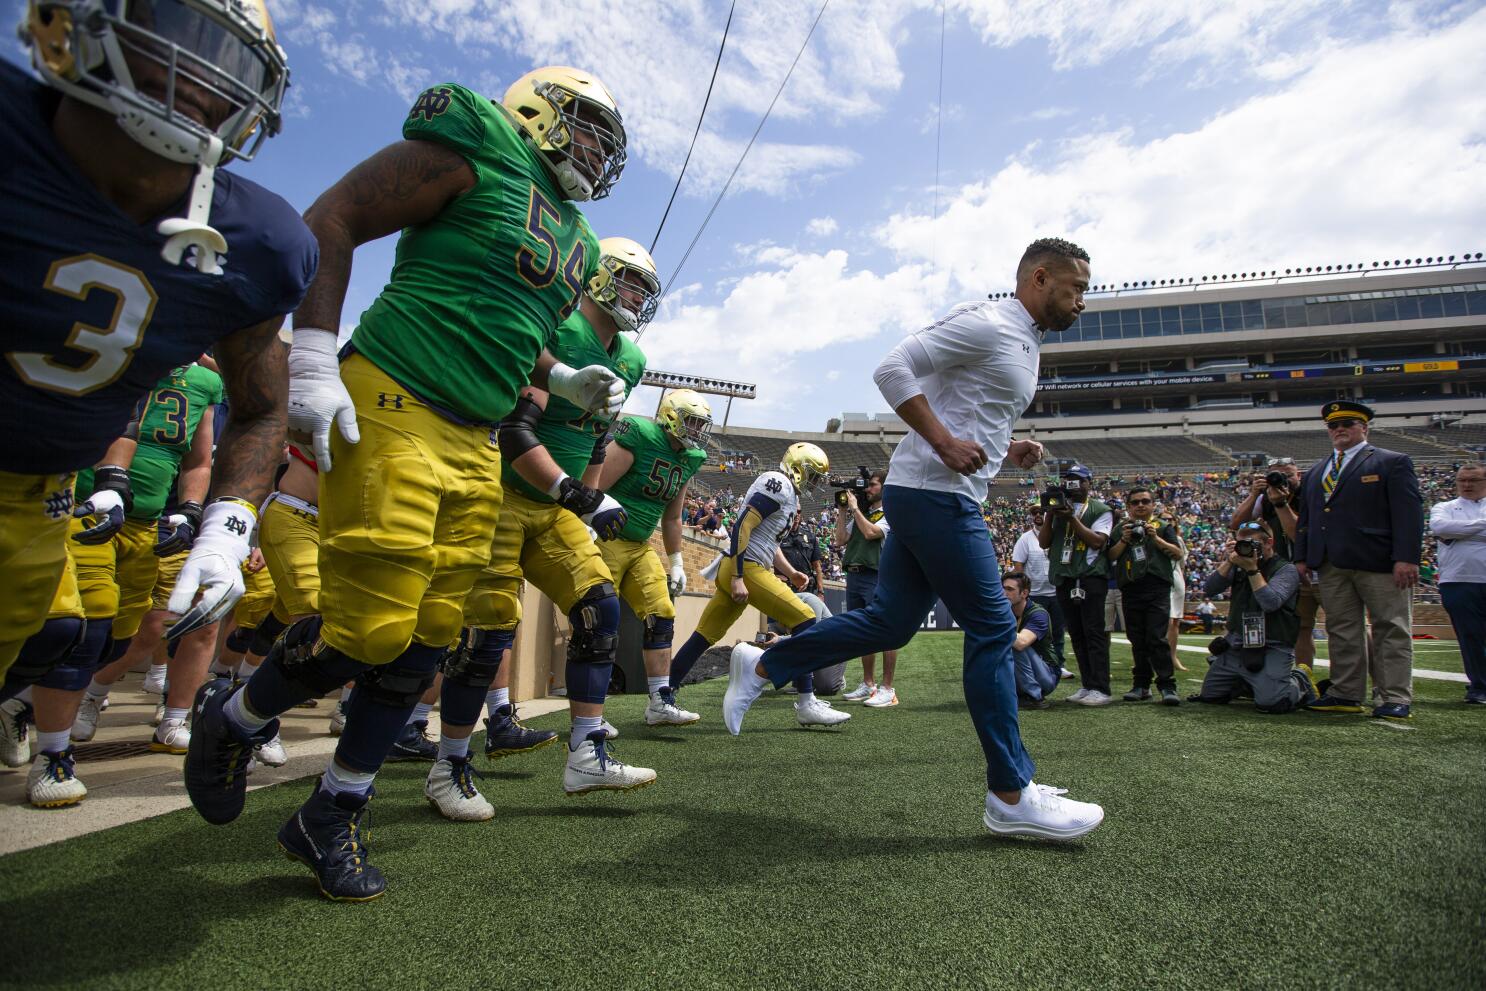 Freeman turns attention to recruiting after 1st Irish spring - The